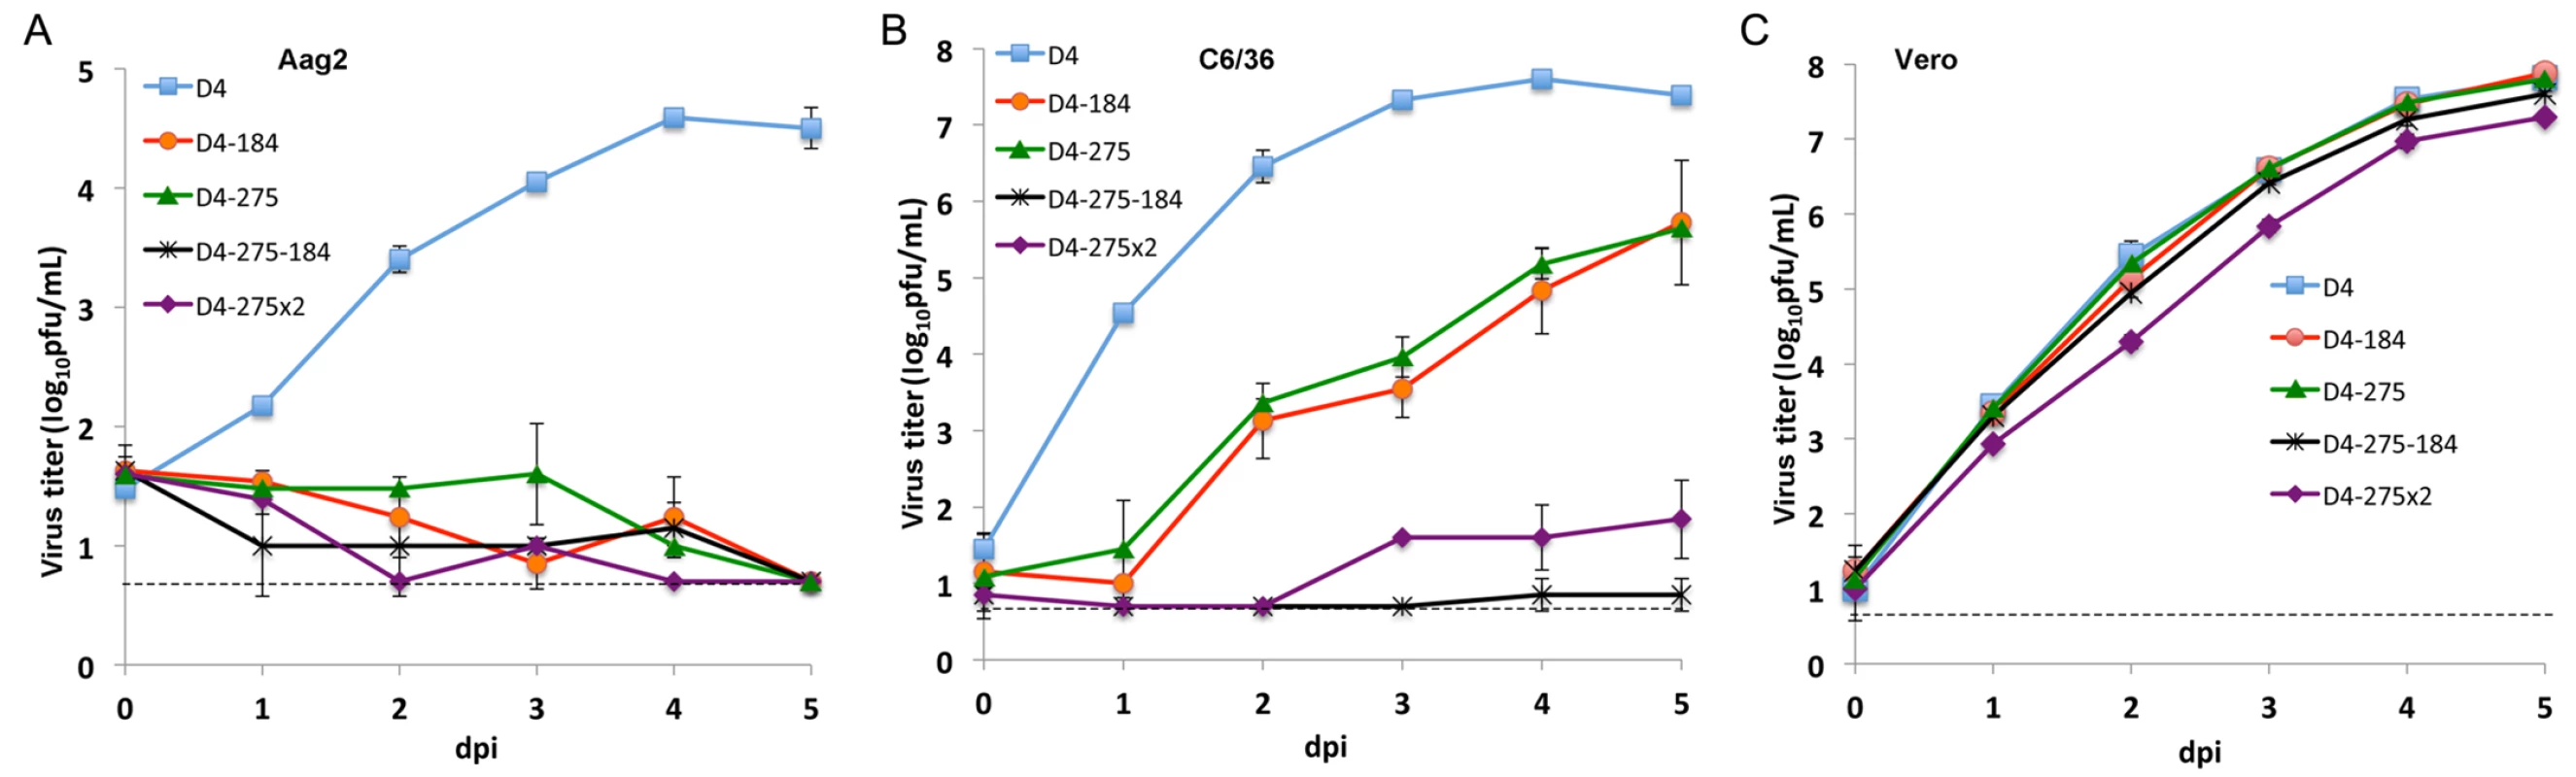 Effect of combined mir-184 and mir-275 co-targeting of DEN4 genome in the 3’NCR on virus replication in mosquito and Vero cells.